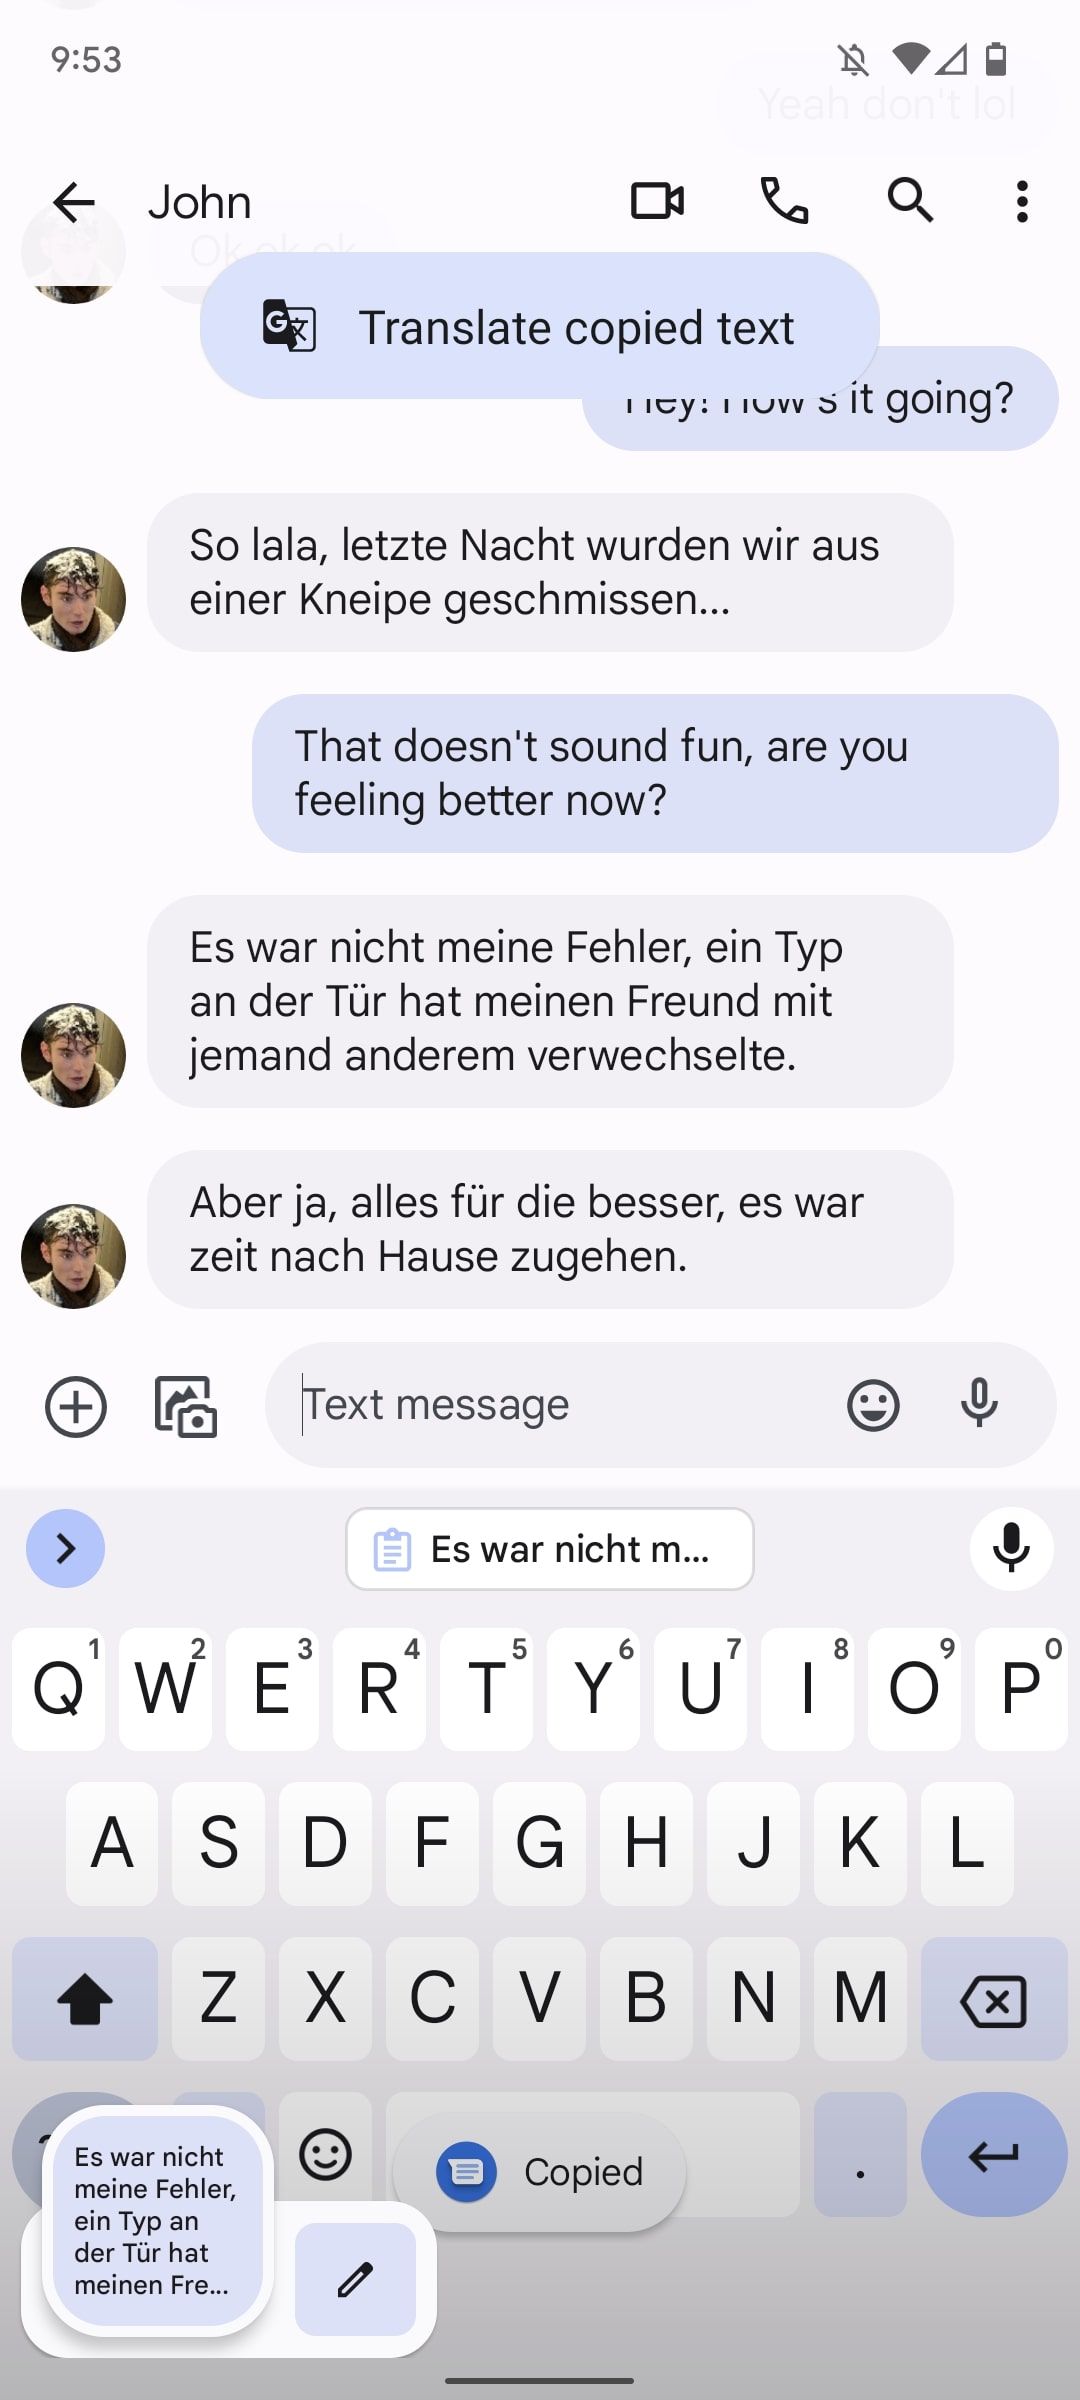 A text message conversation in white and blue.